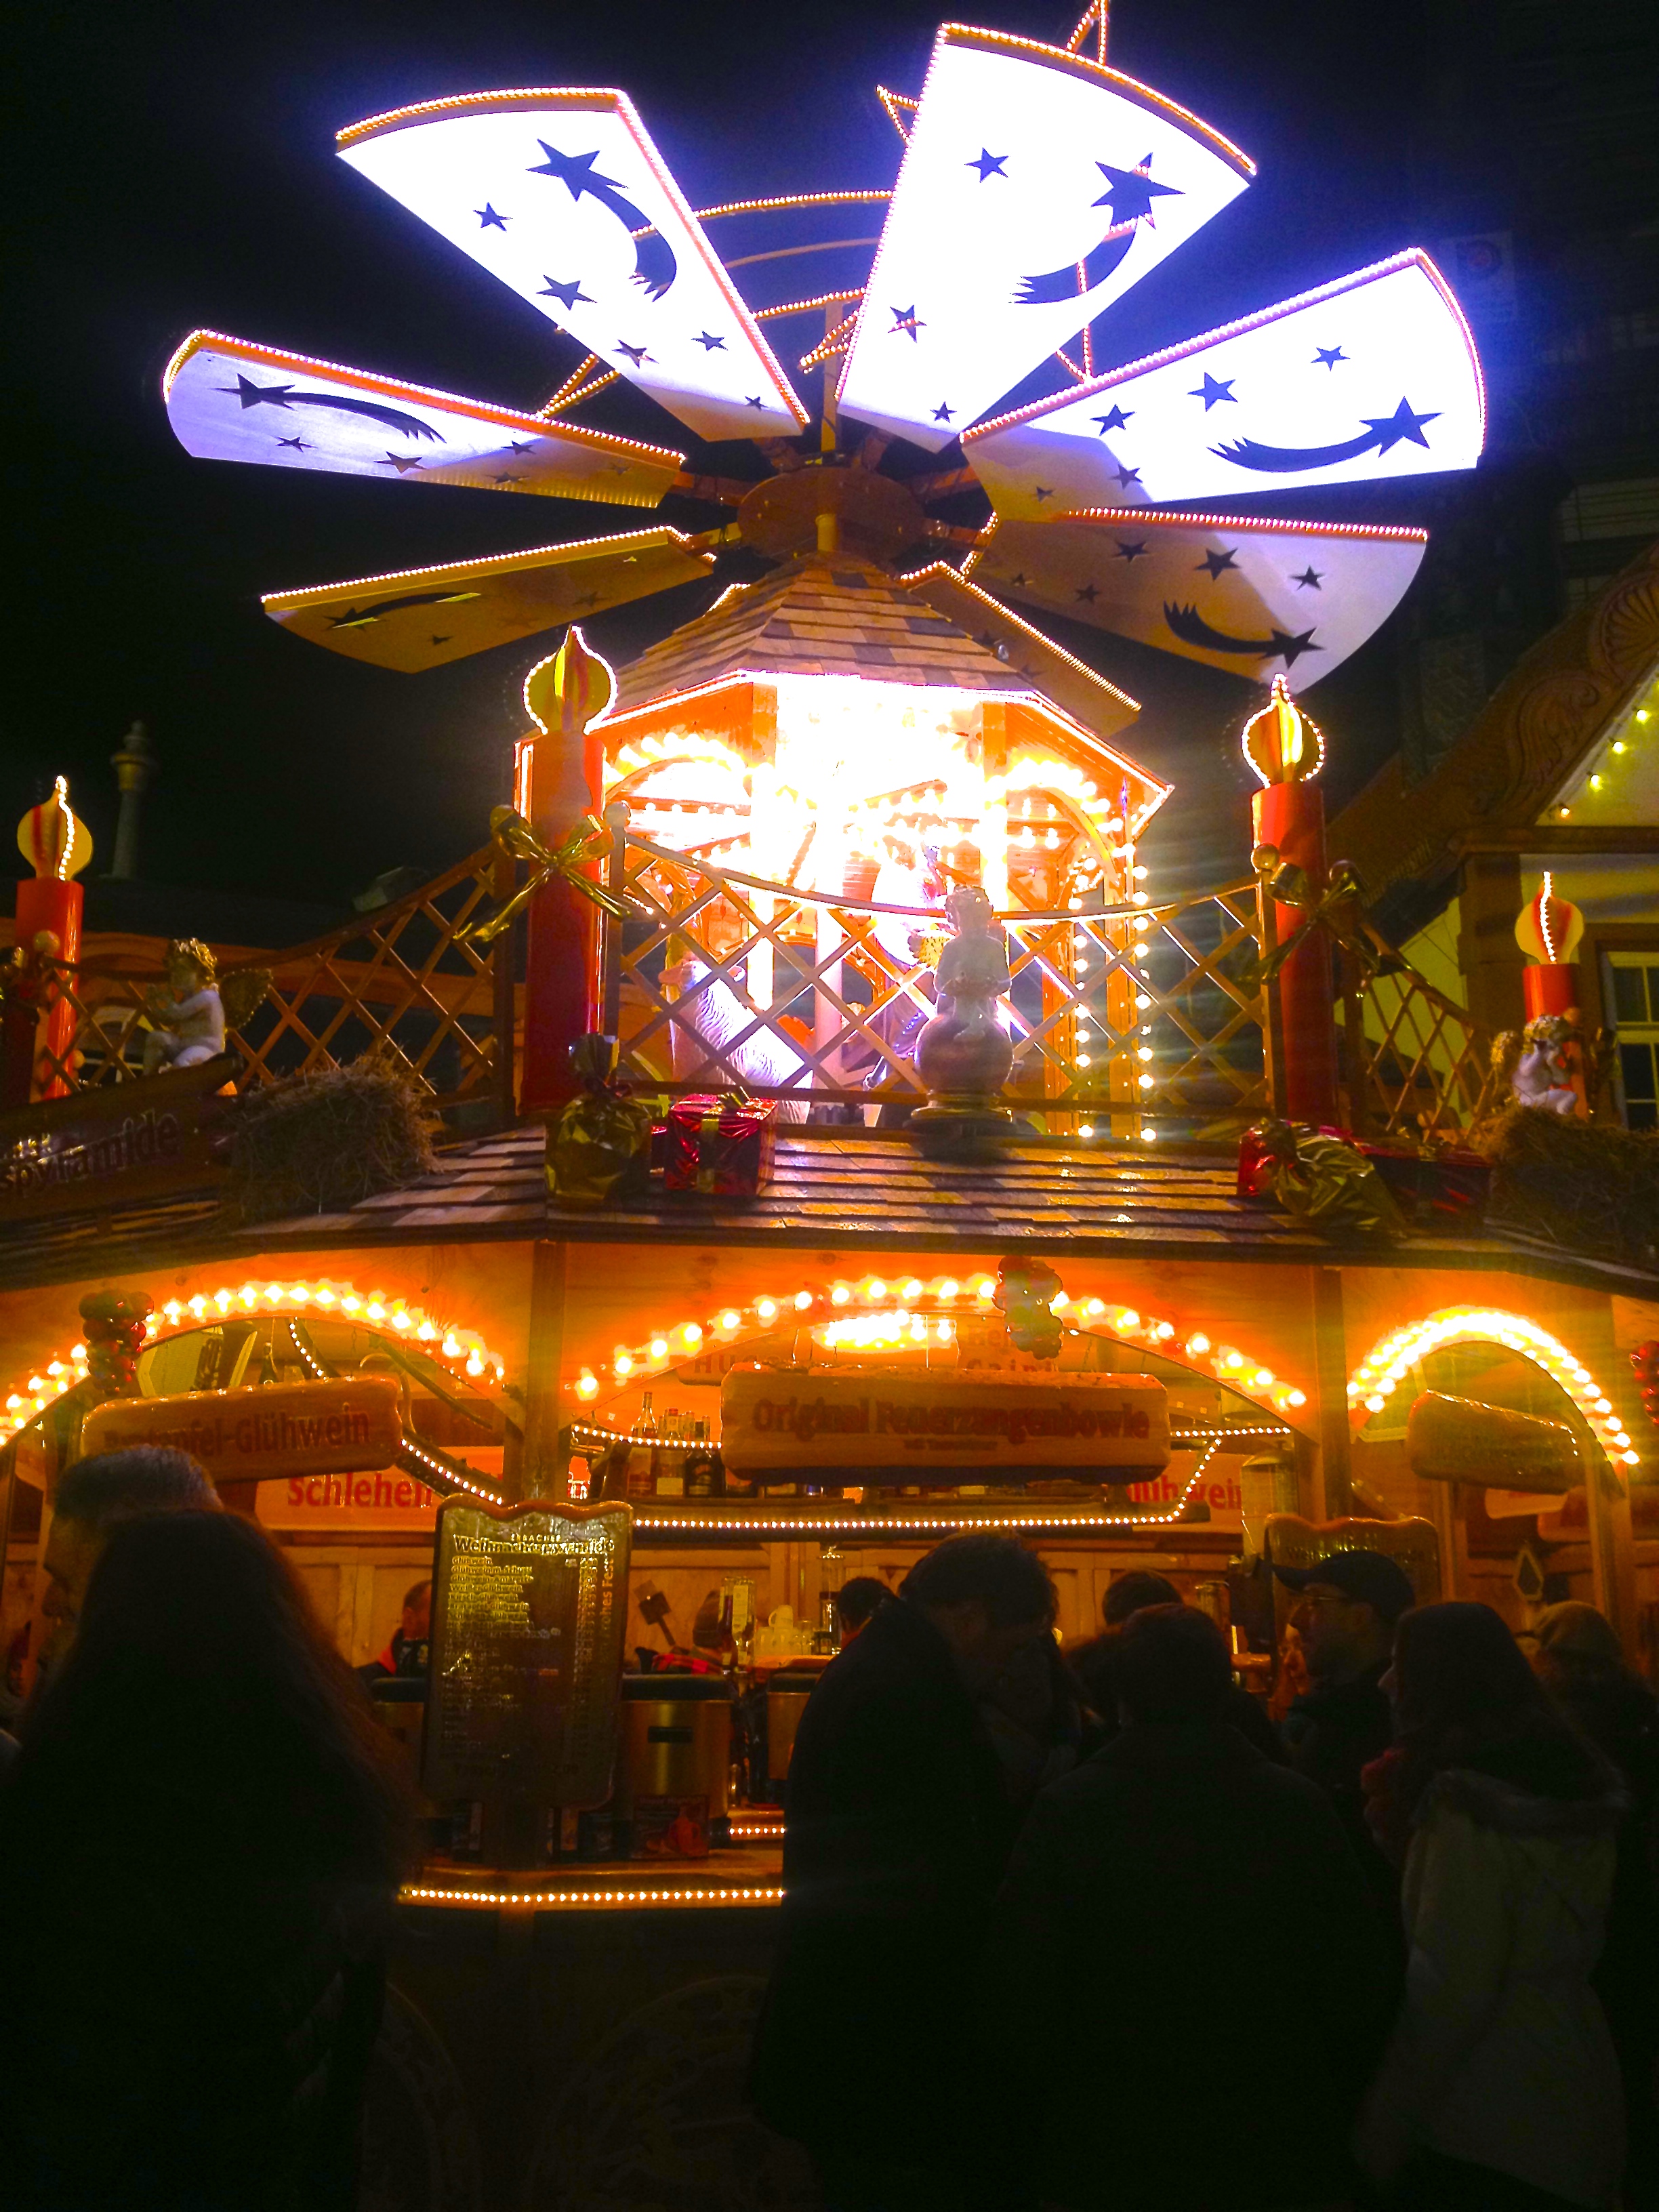 Erbach’s Charming Christmas Markets and Shops